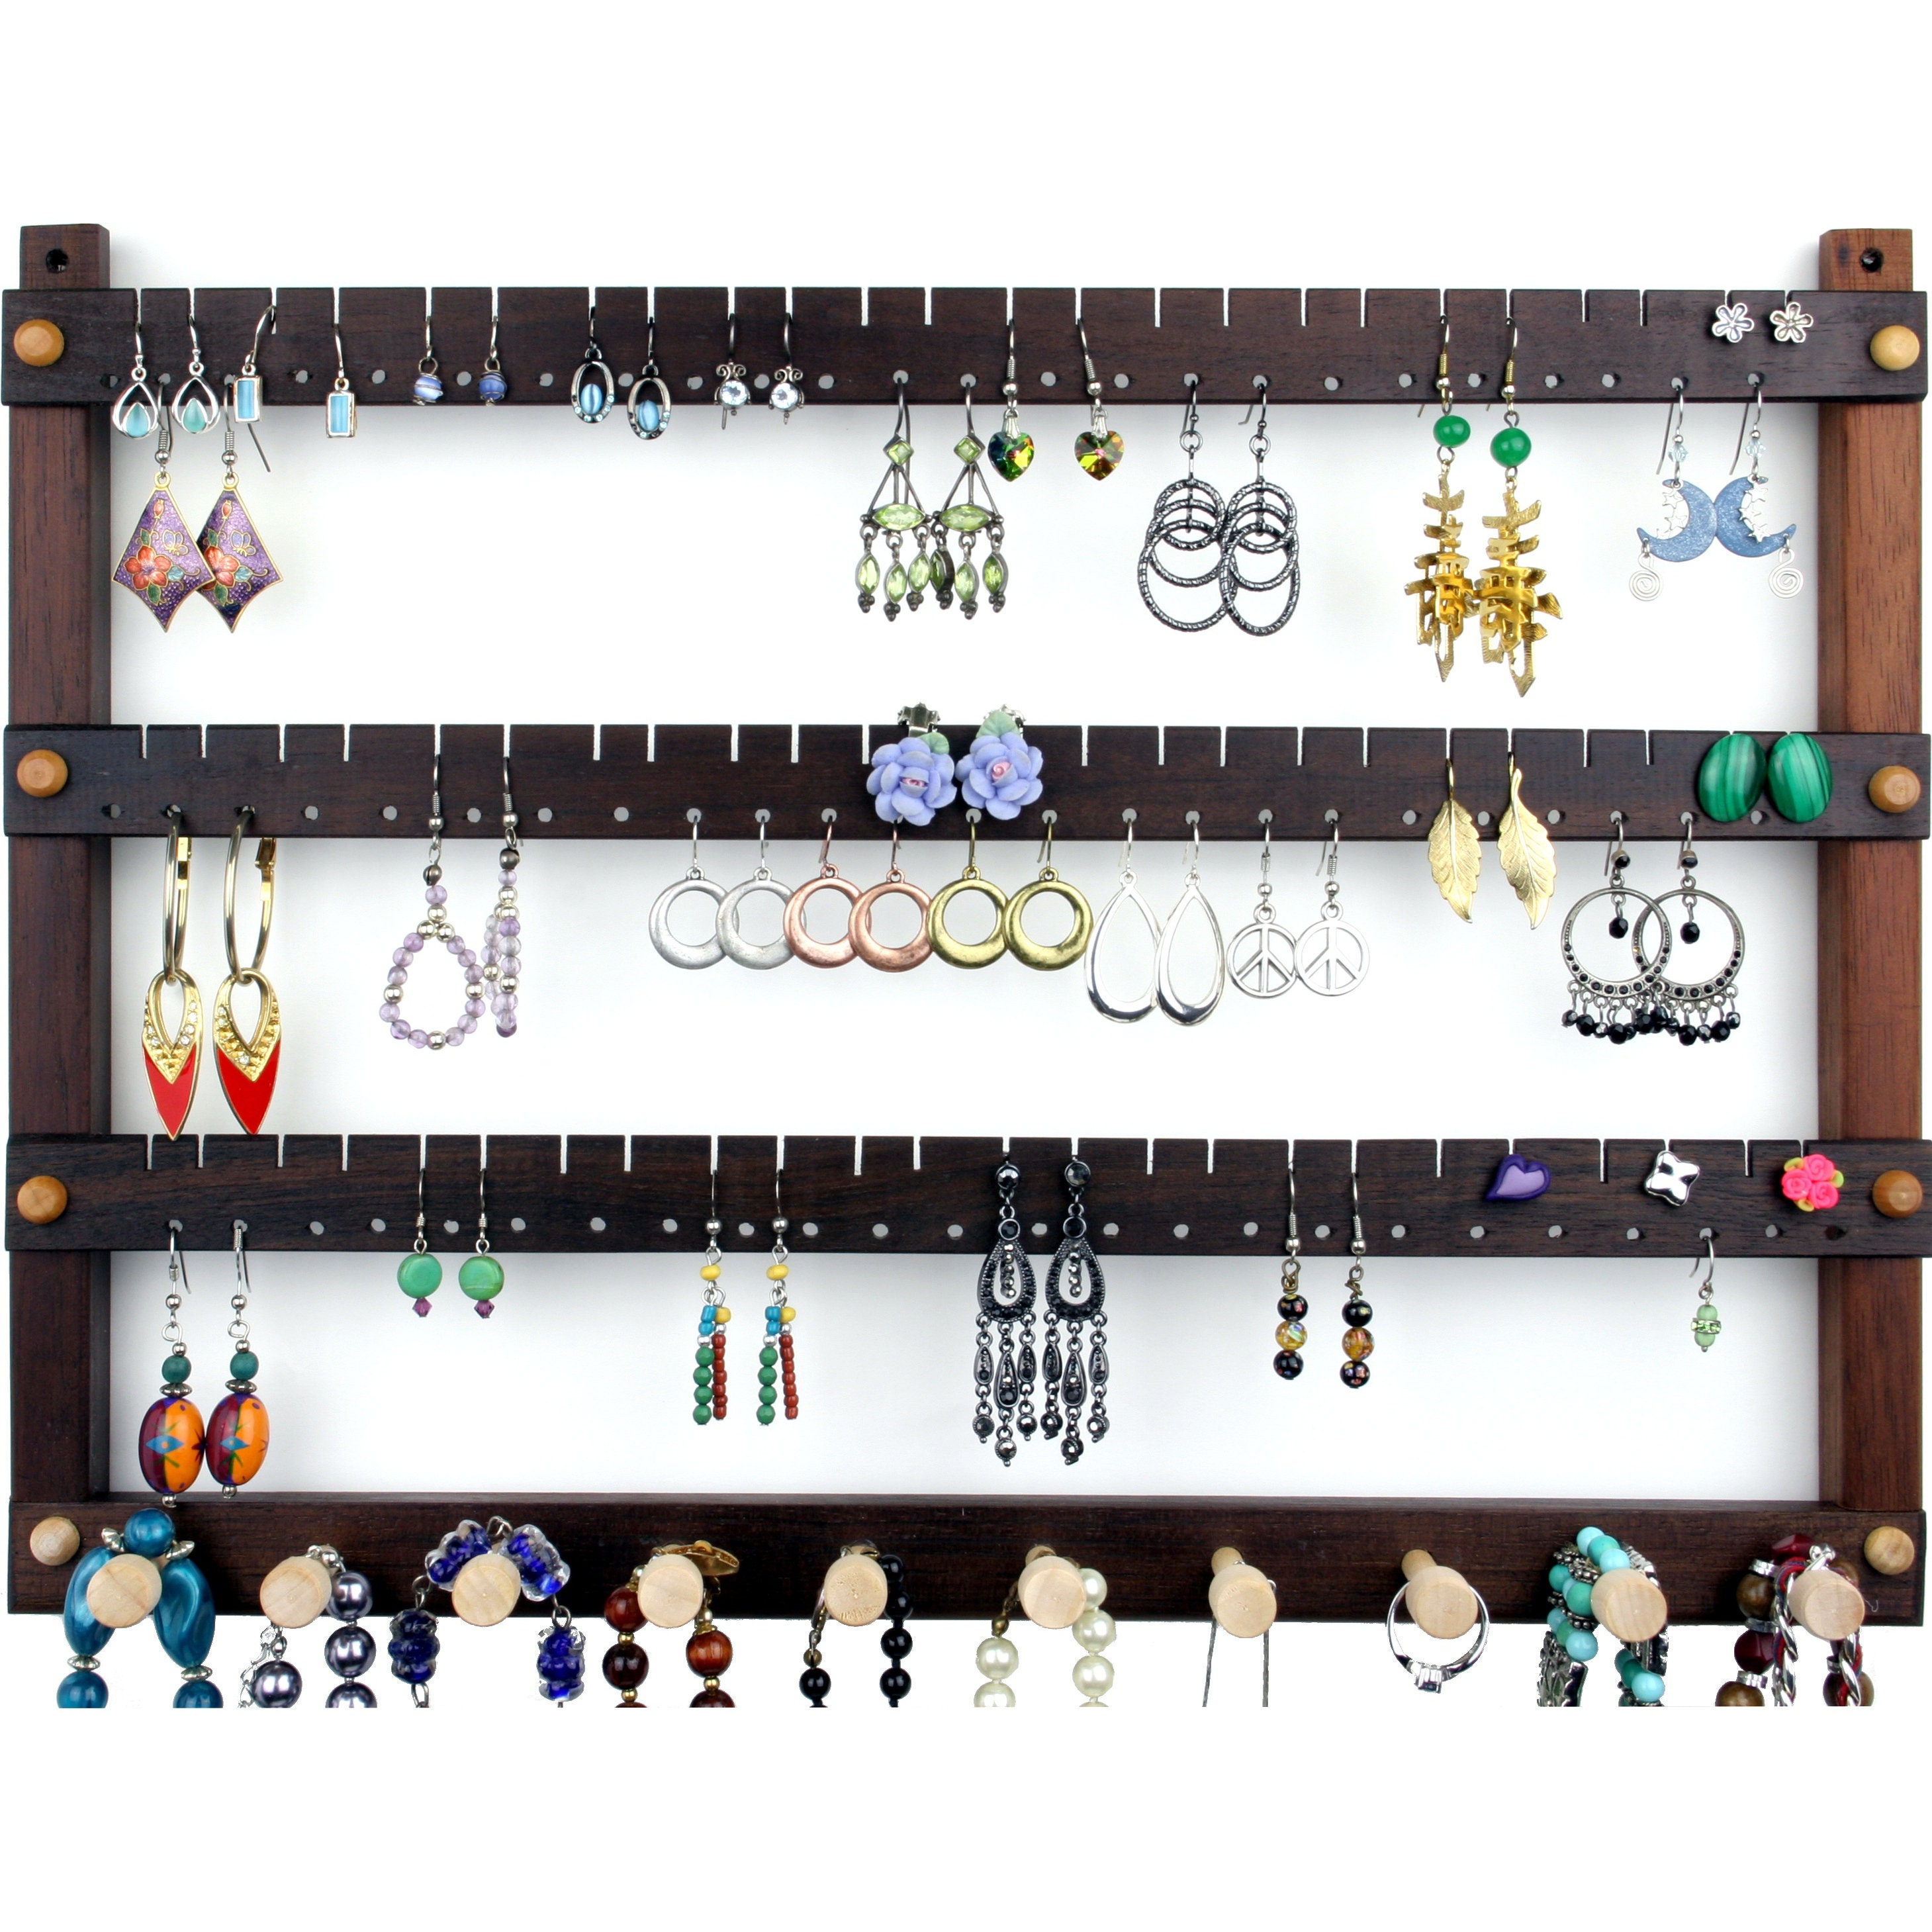 126 Pair Hanging Earring Holder Jewelry Organizer, Oak, Wood, Necklace  Display. 8 Pegs. Wall Mounted. Jewelry Holder 